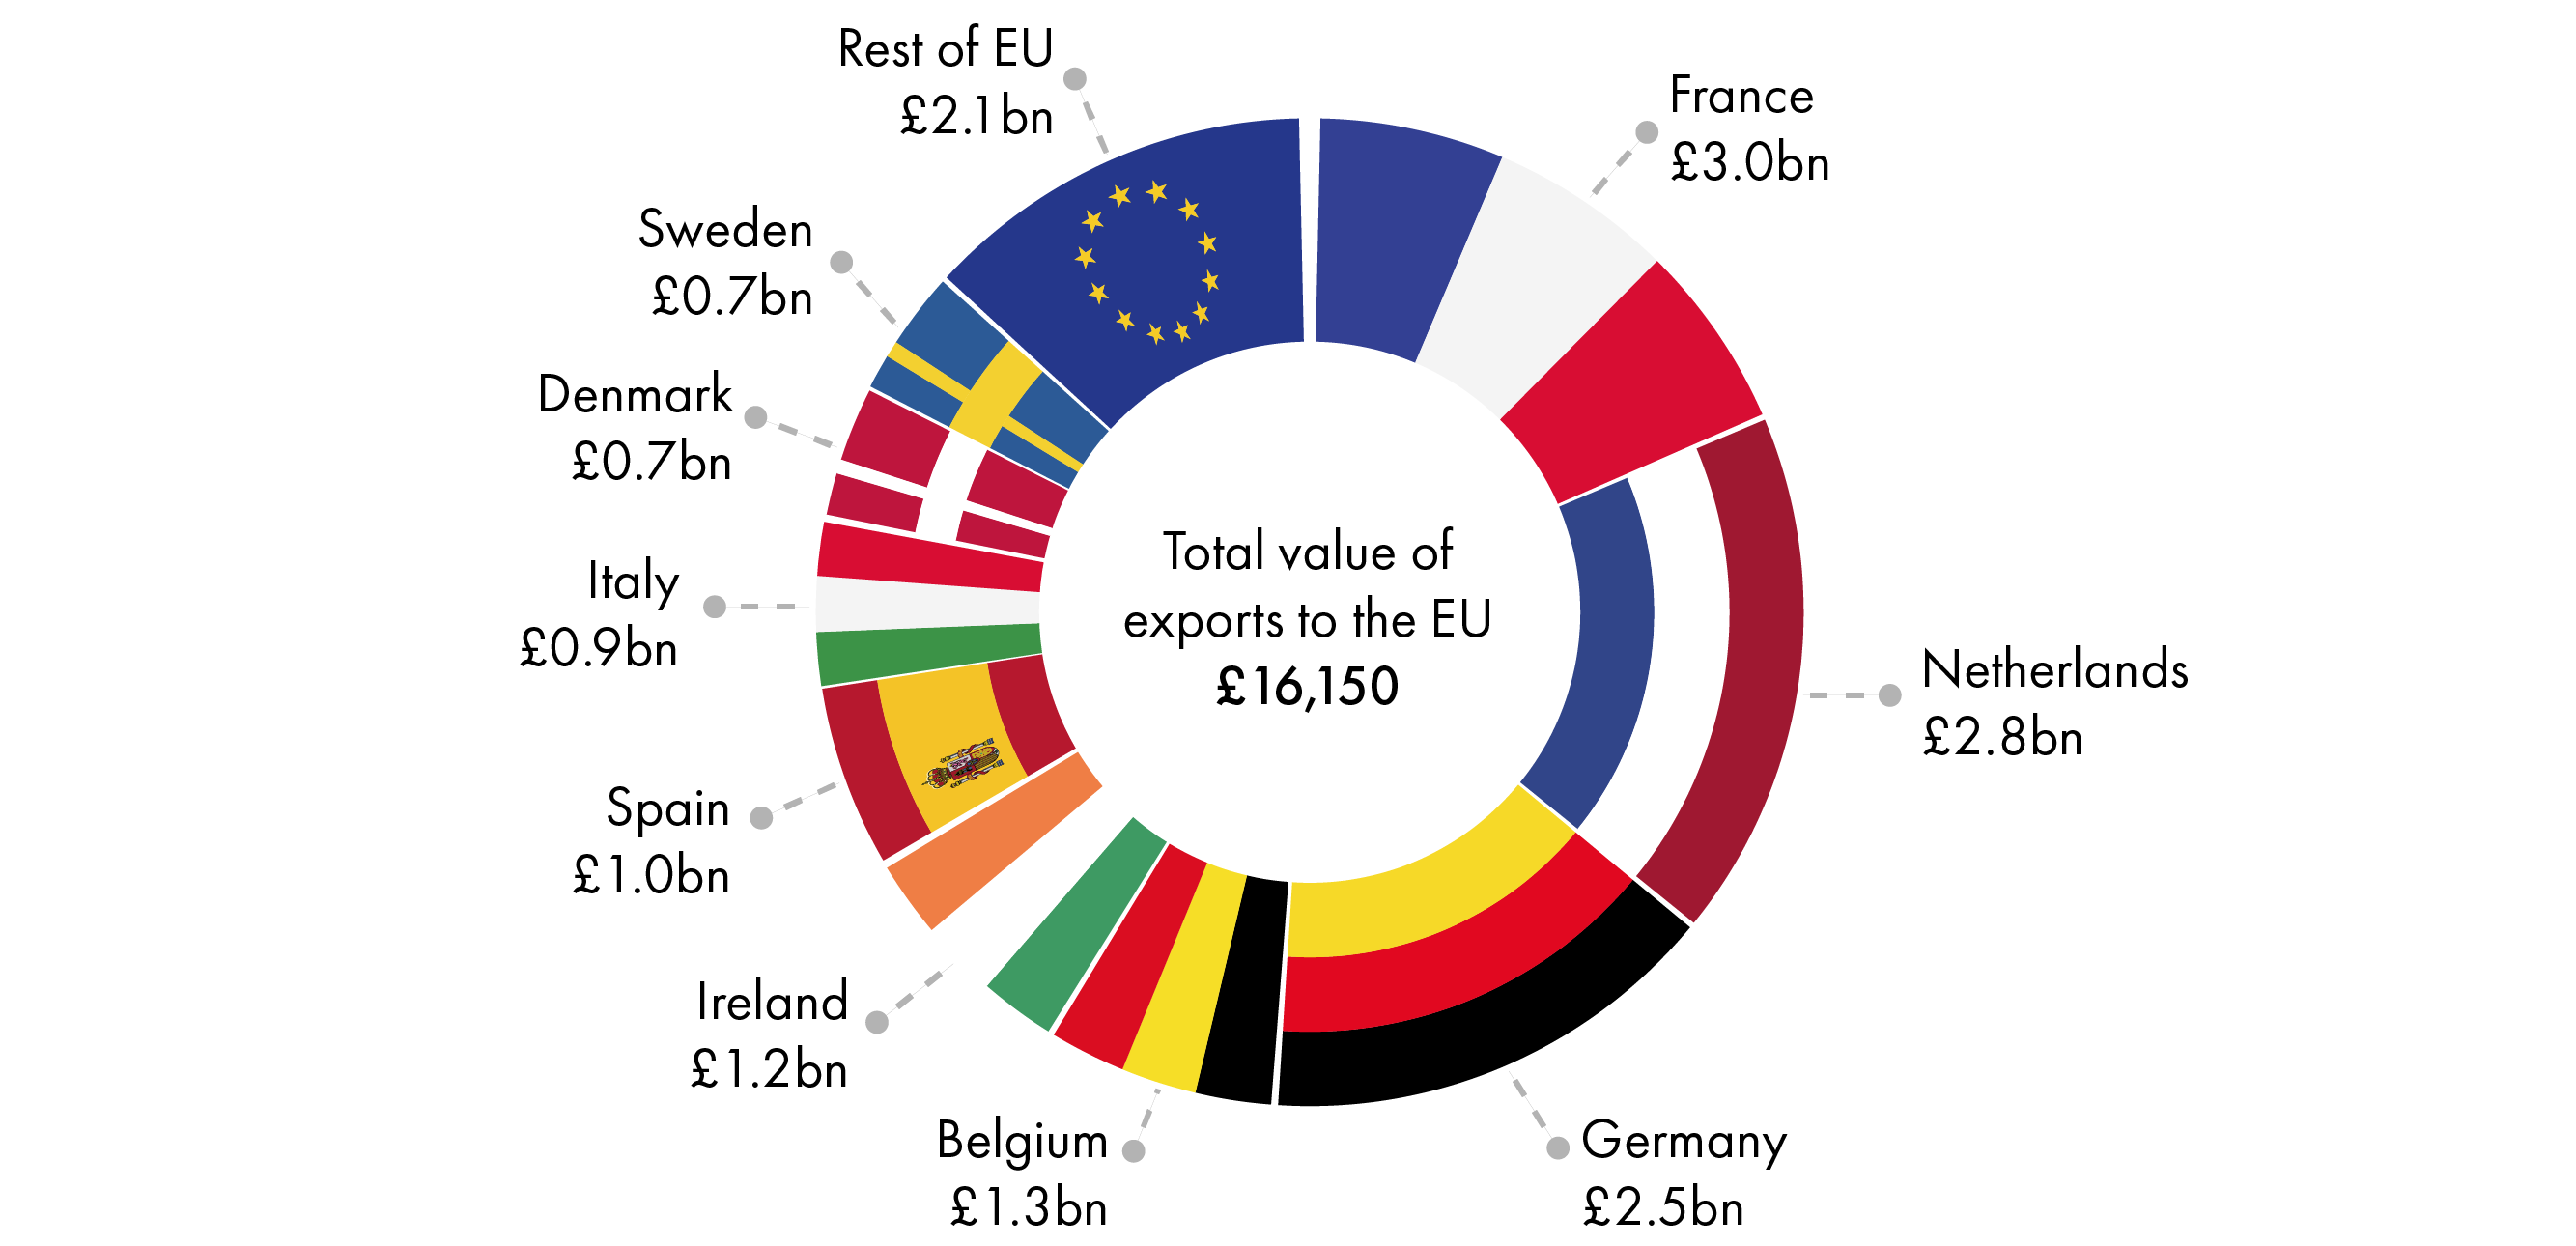 Within the EU, France is Scotland's largest export destination with exports valued at £3.0 billion in 2018.